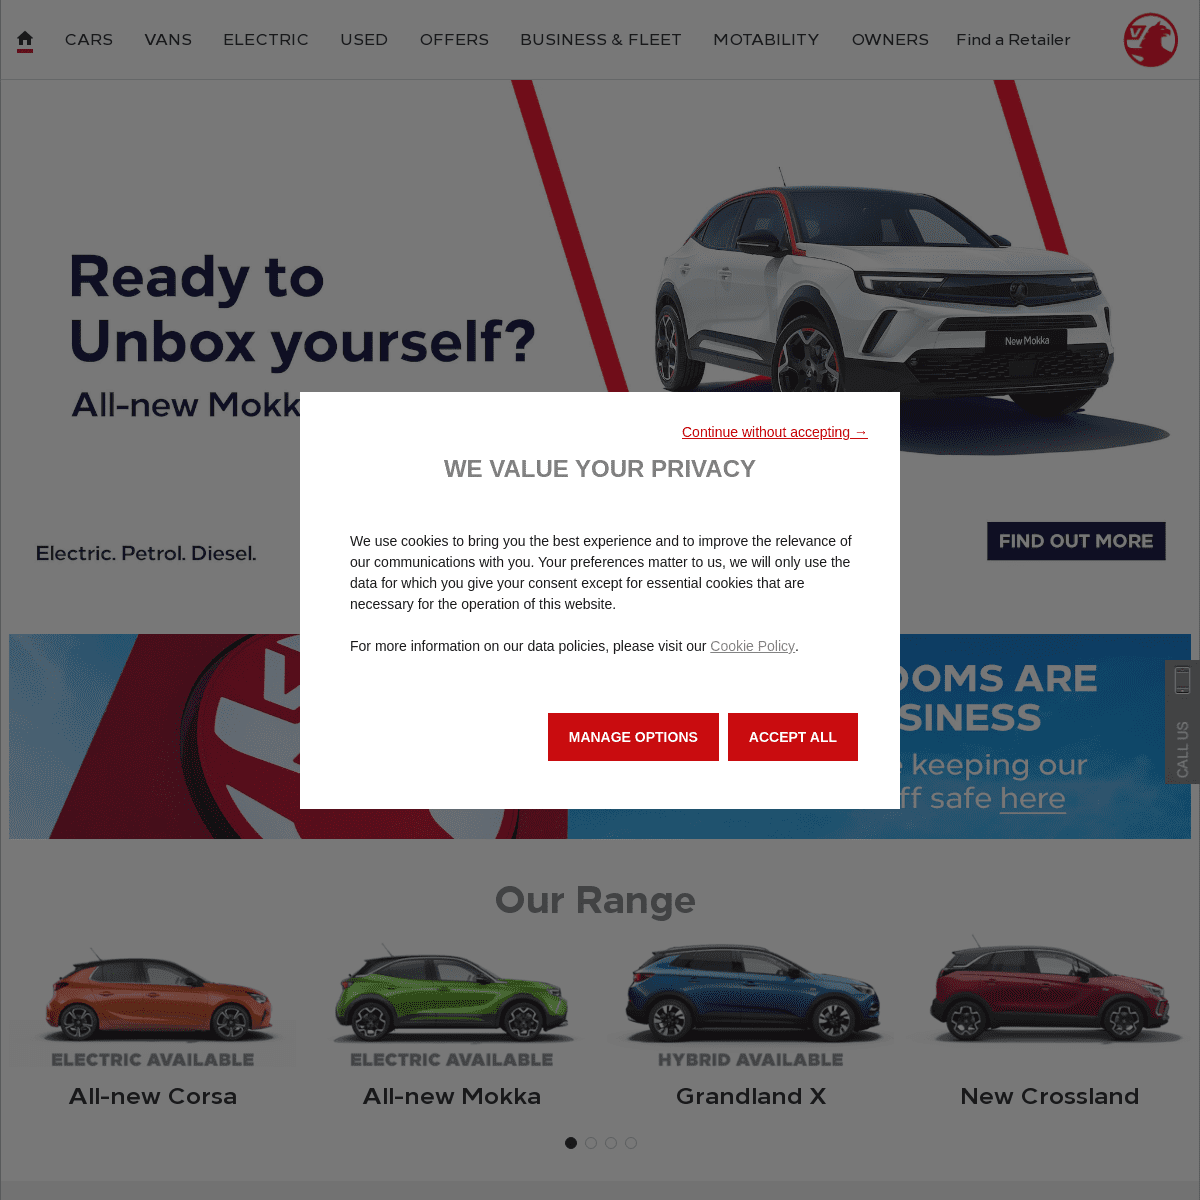 A complete backup of https://vauxhall.co.uk